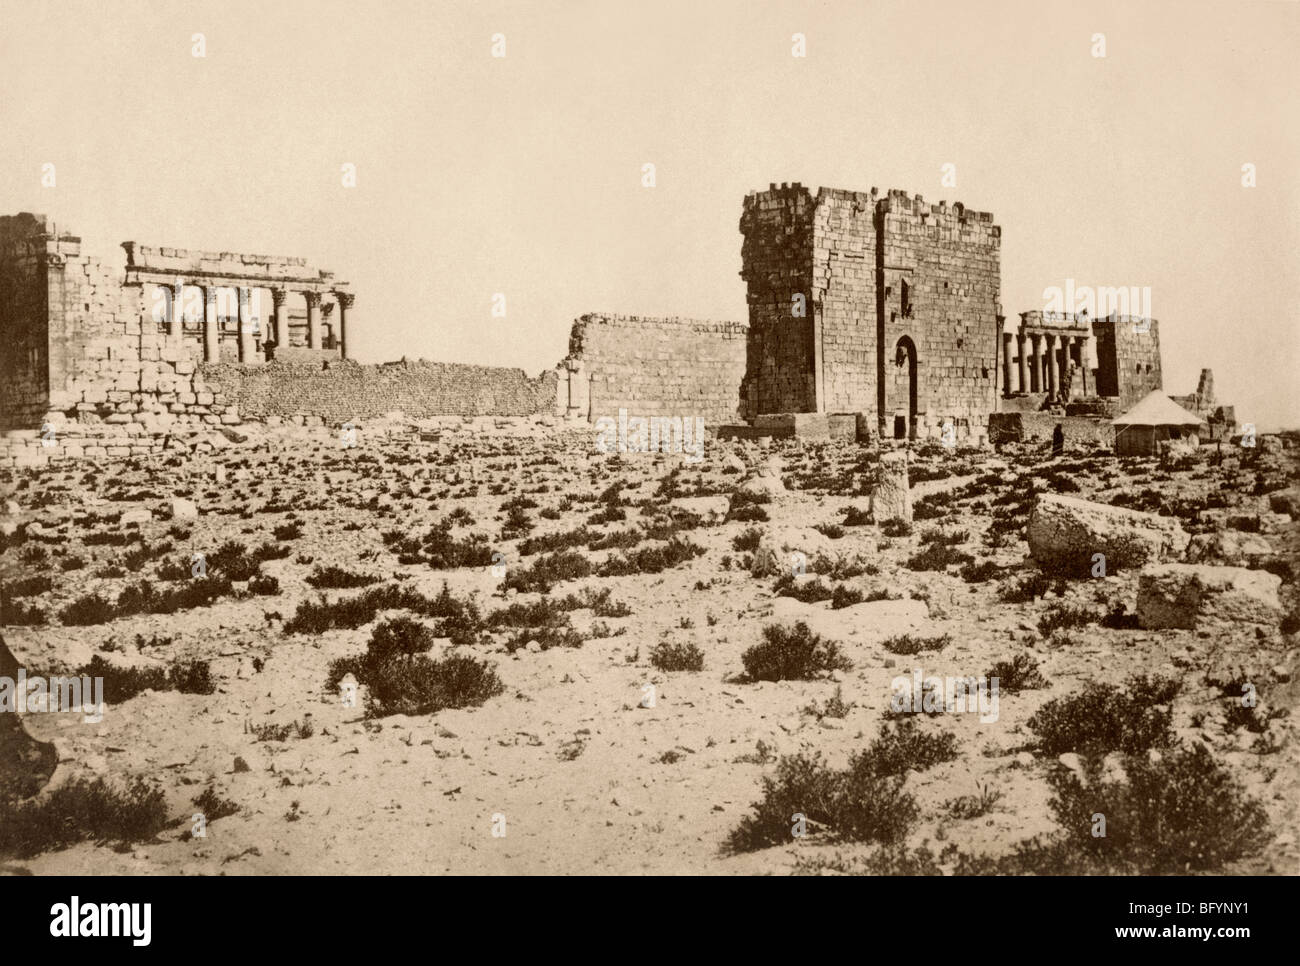 Ruins of the temples of ancient Palmyra, or Tadmor, in Syria, late 1800s. Photograph Stock Photo